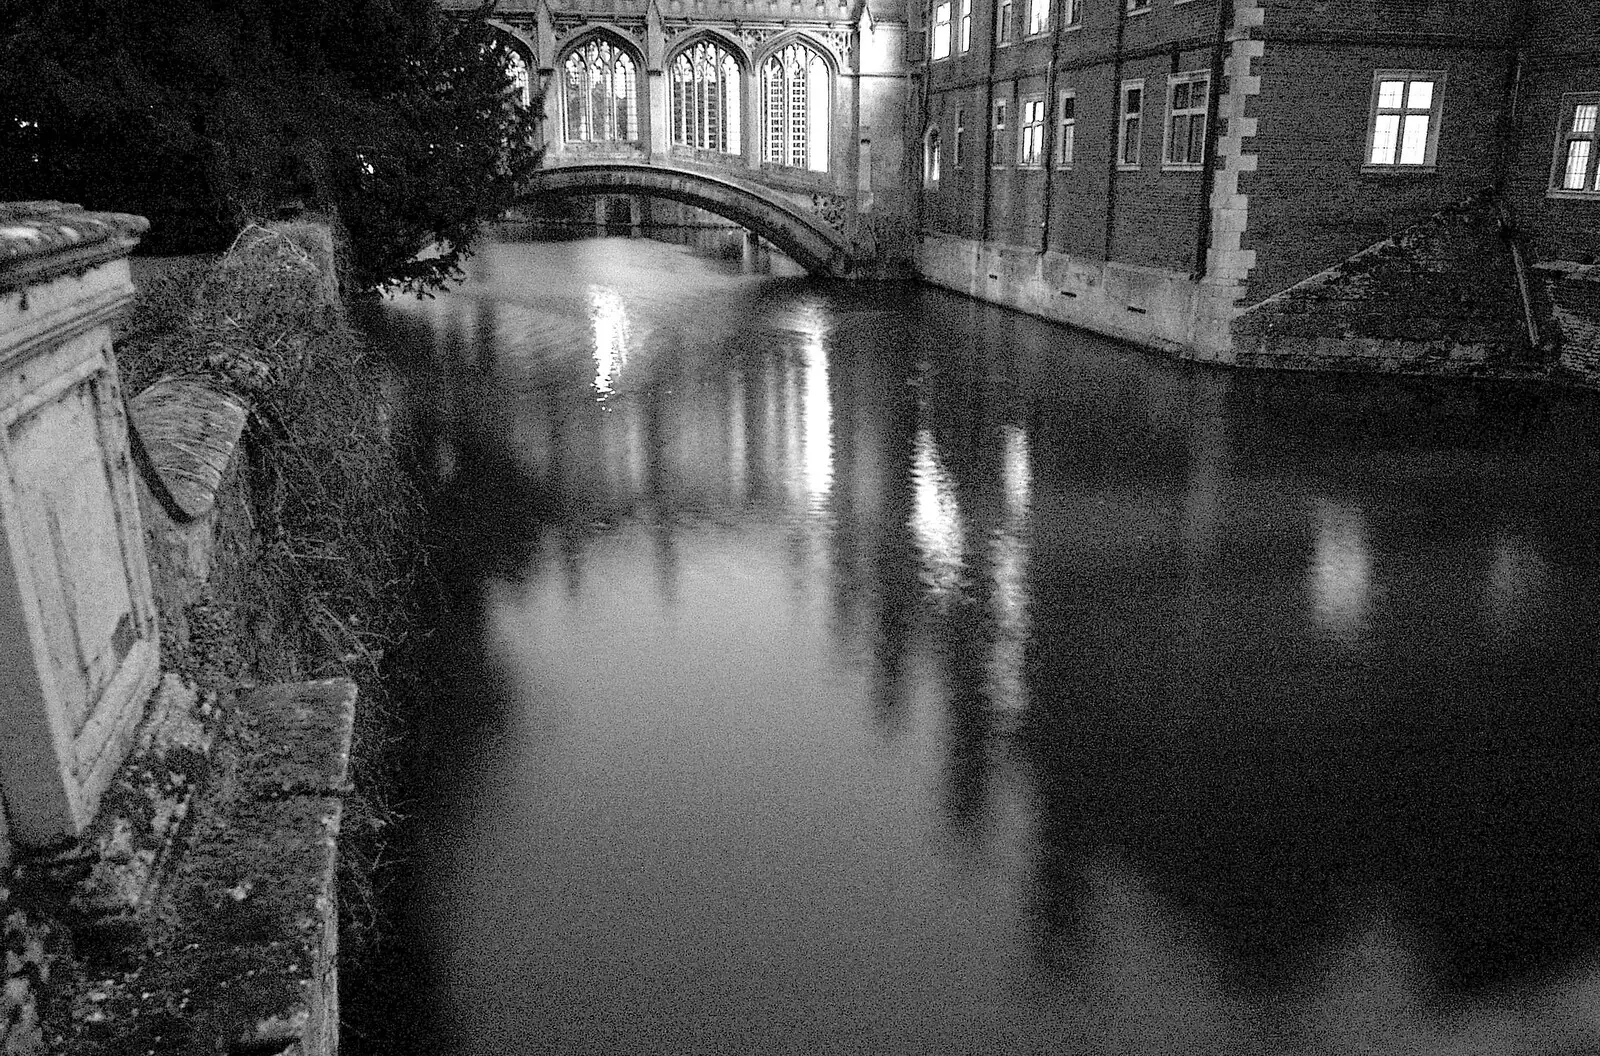 The Bridge of Sighs at St John's College, from Wrecked Cars, A Night Out and Stick Game in the Cherry Tree, Cambridge and Yaxley, Suffolk- 24th February 2006